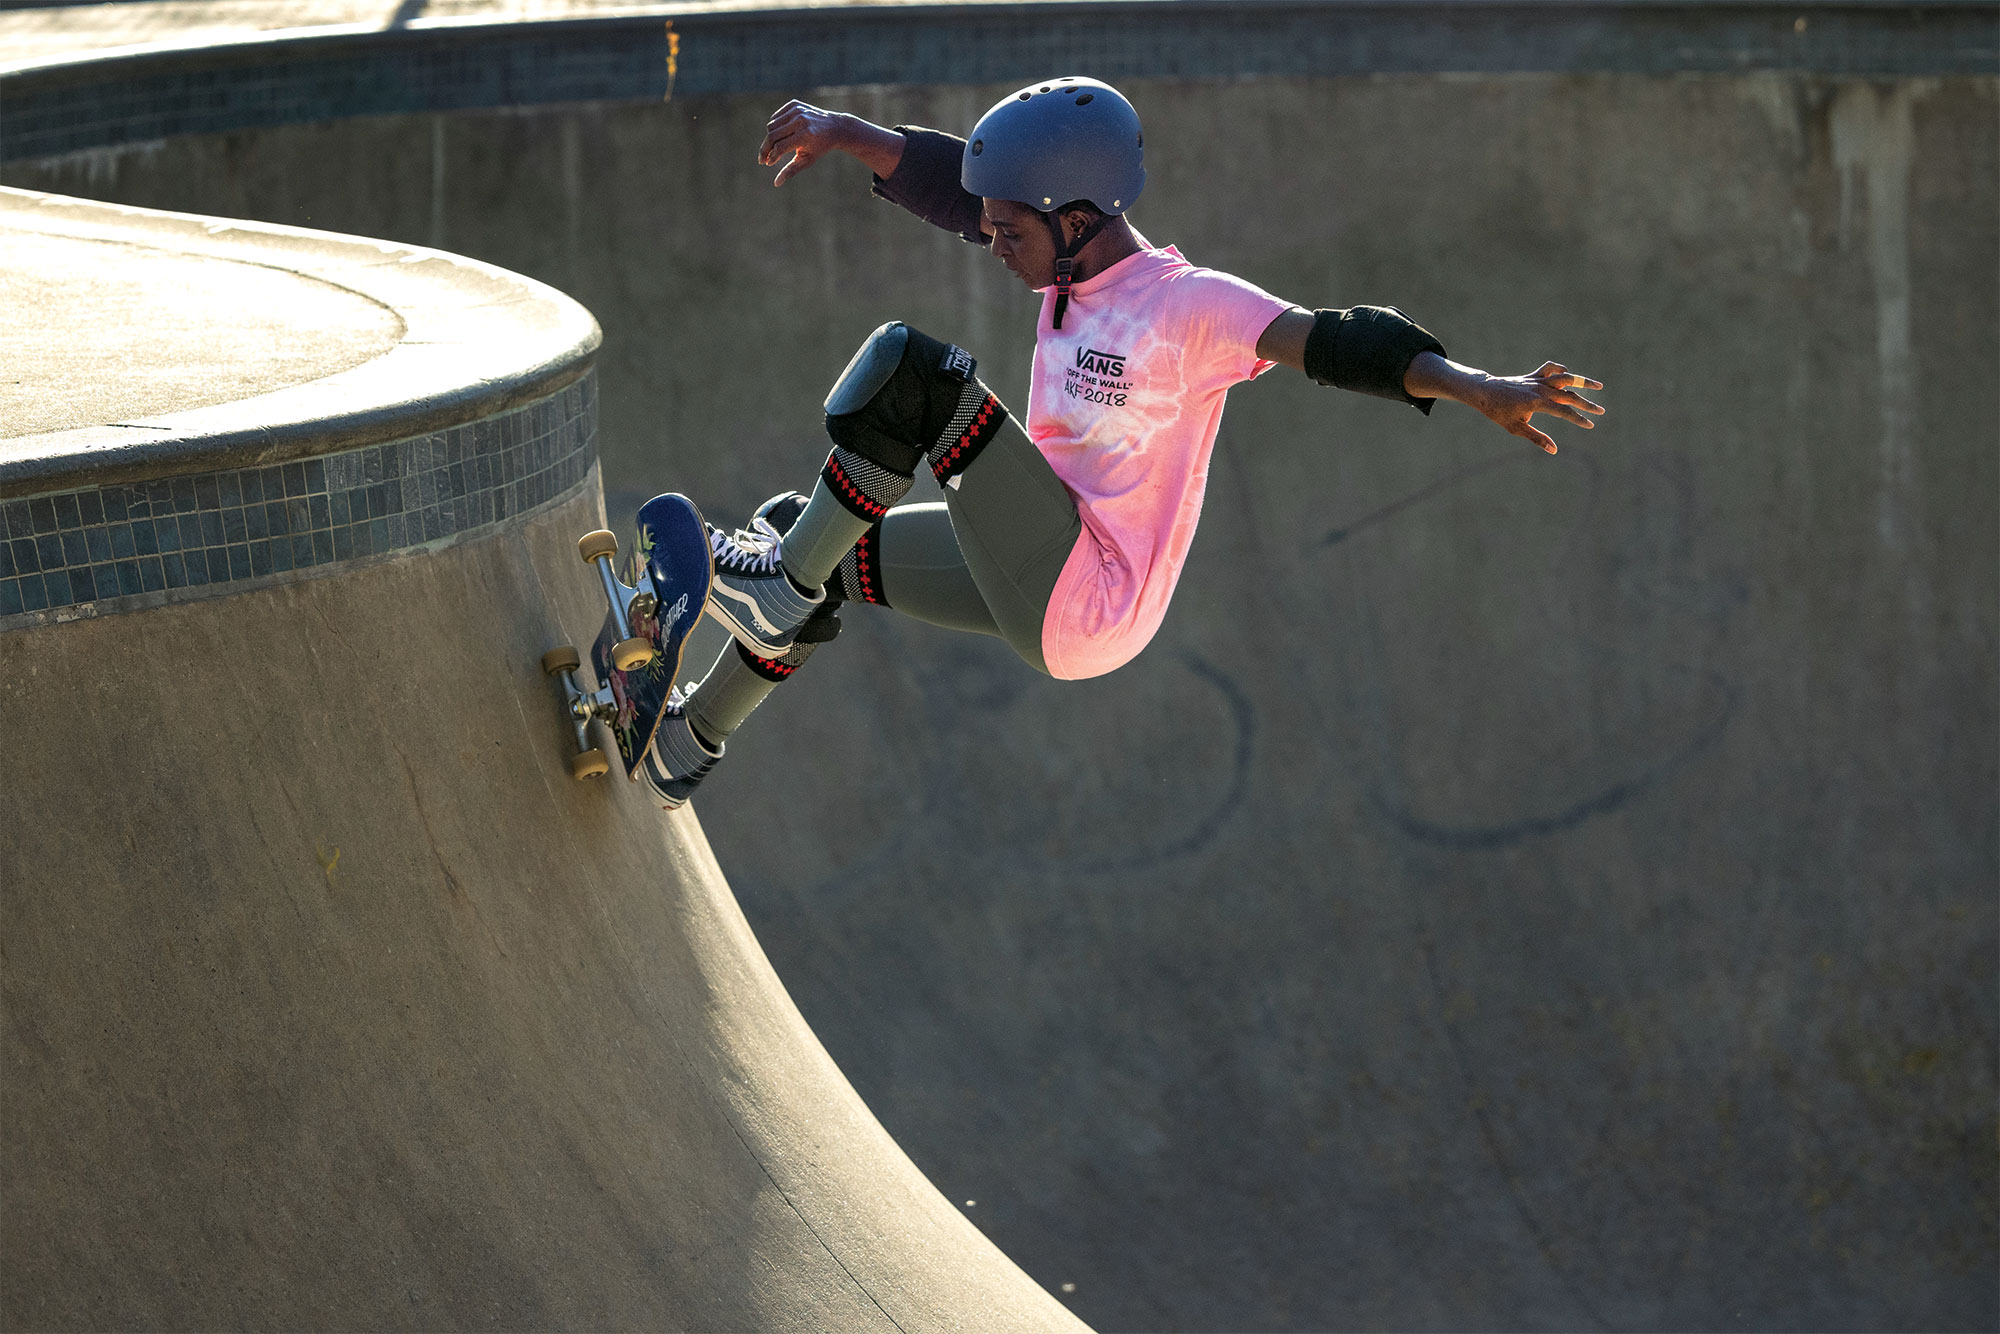 Mame Bonsu, wearing a pink tie-dye Vans shirt and protective gear, skateboarding in a skatepark.